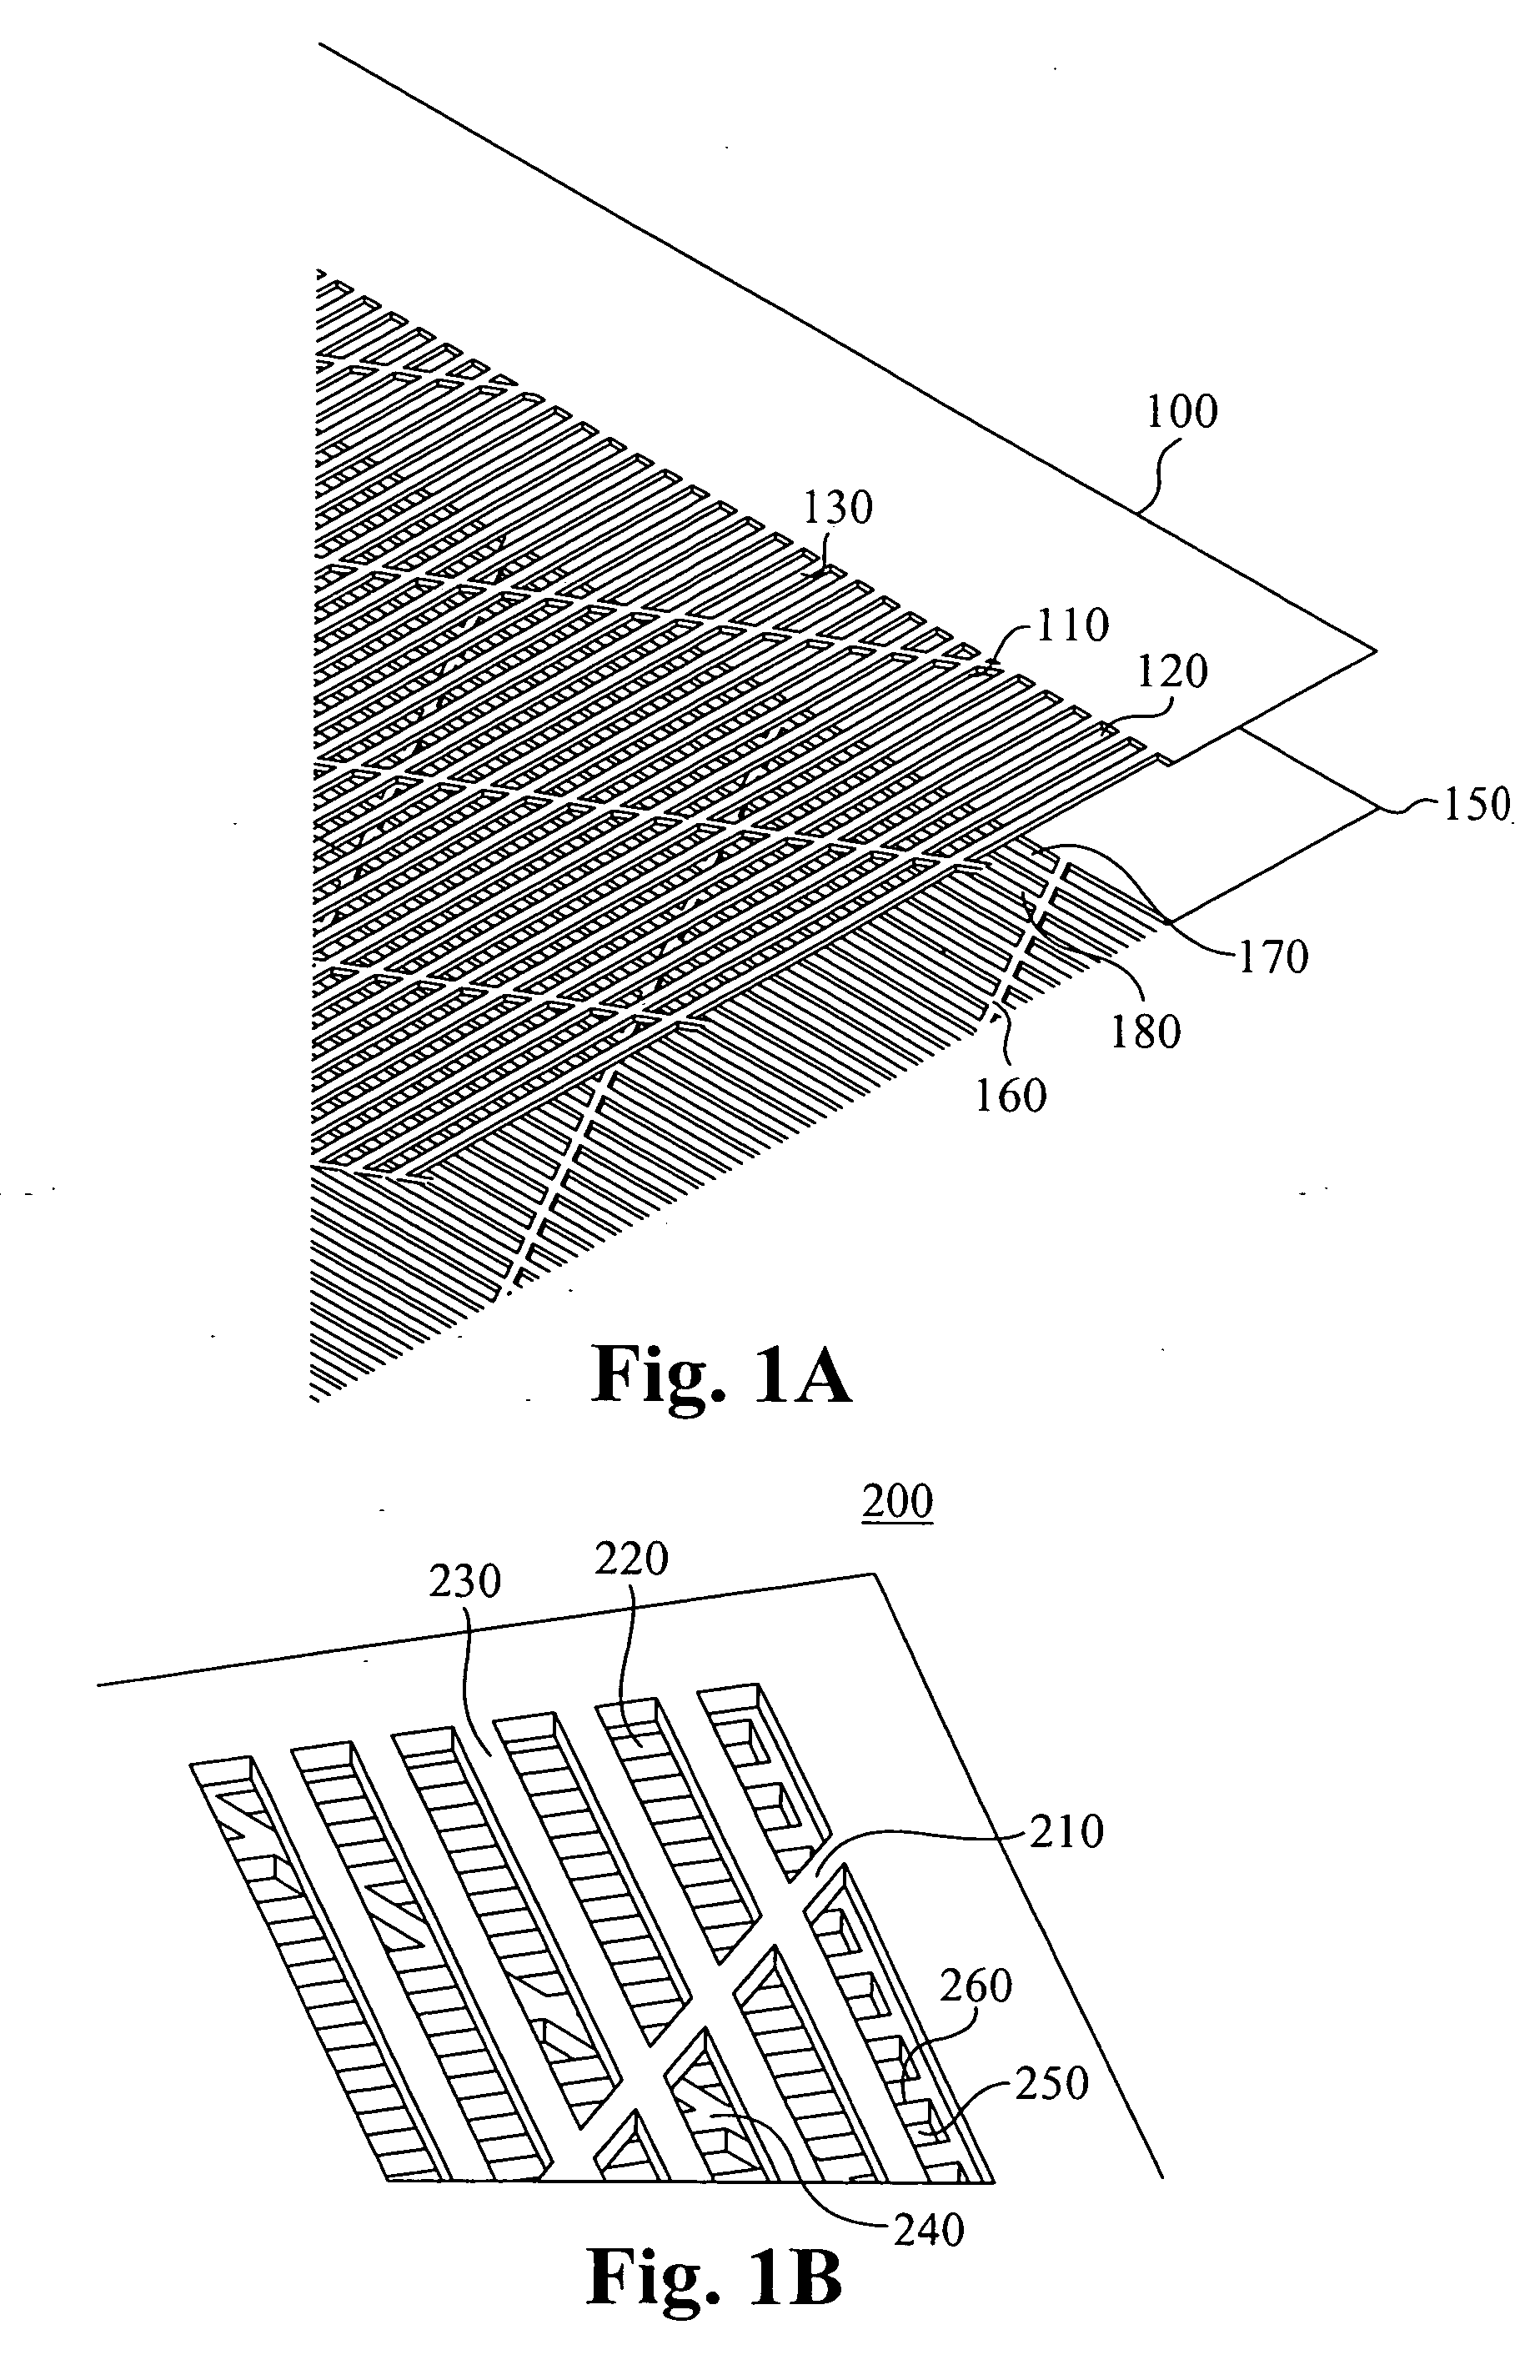 Fabrication of high surface to volume ratio structures and their integration in microheat exchangers for liquid cooling systems